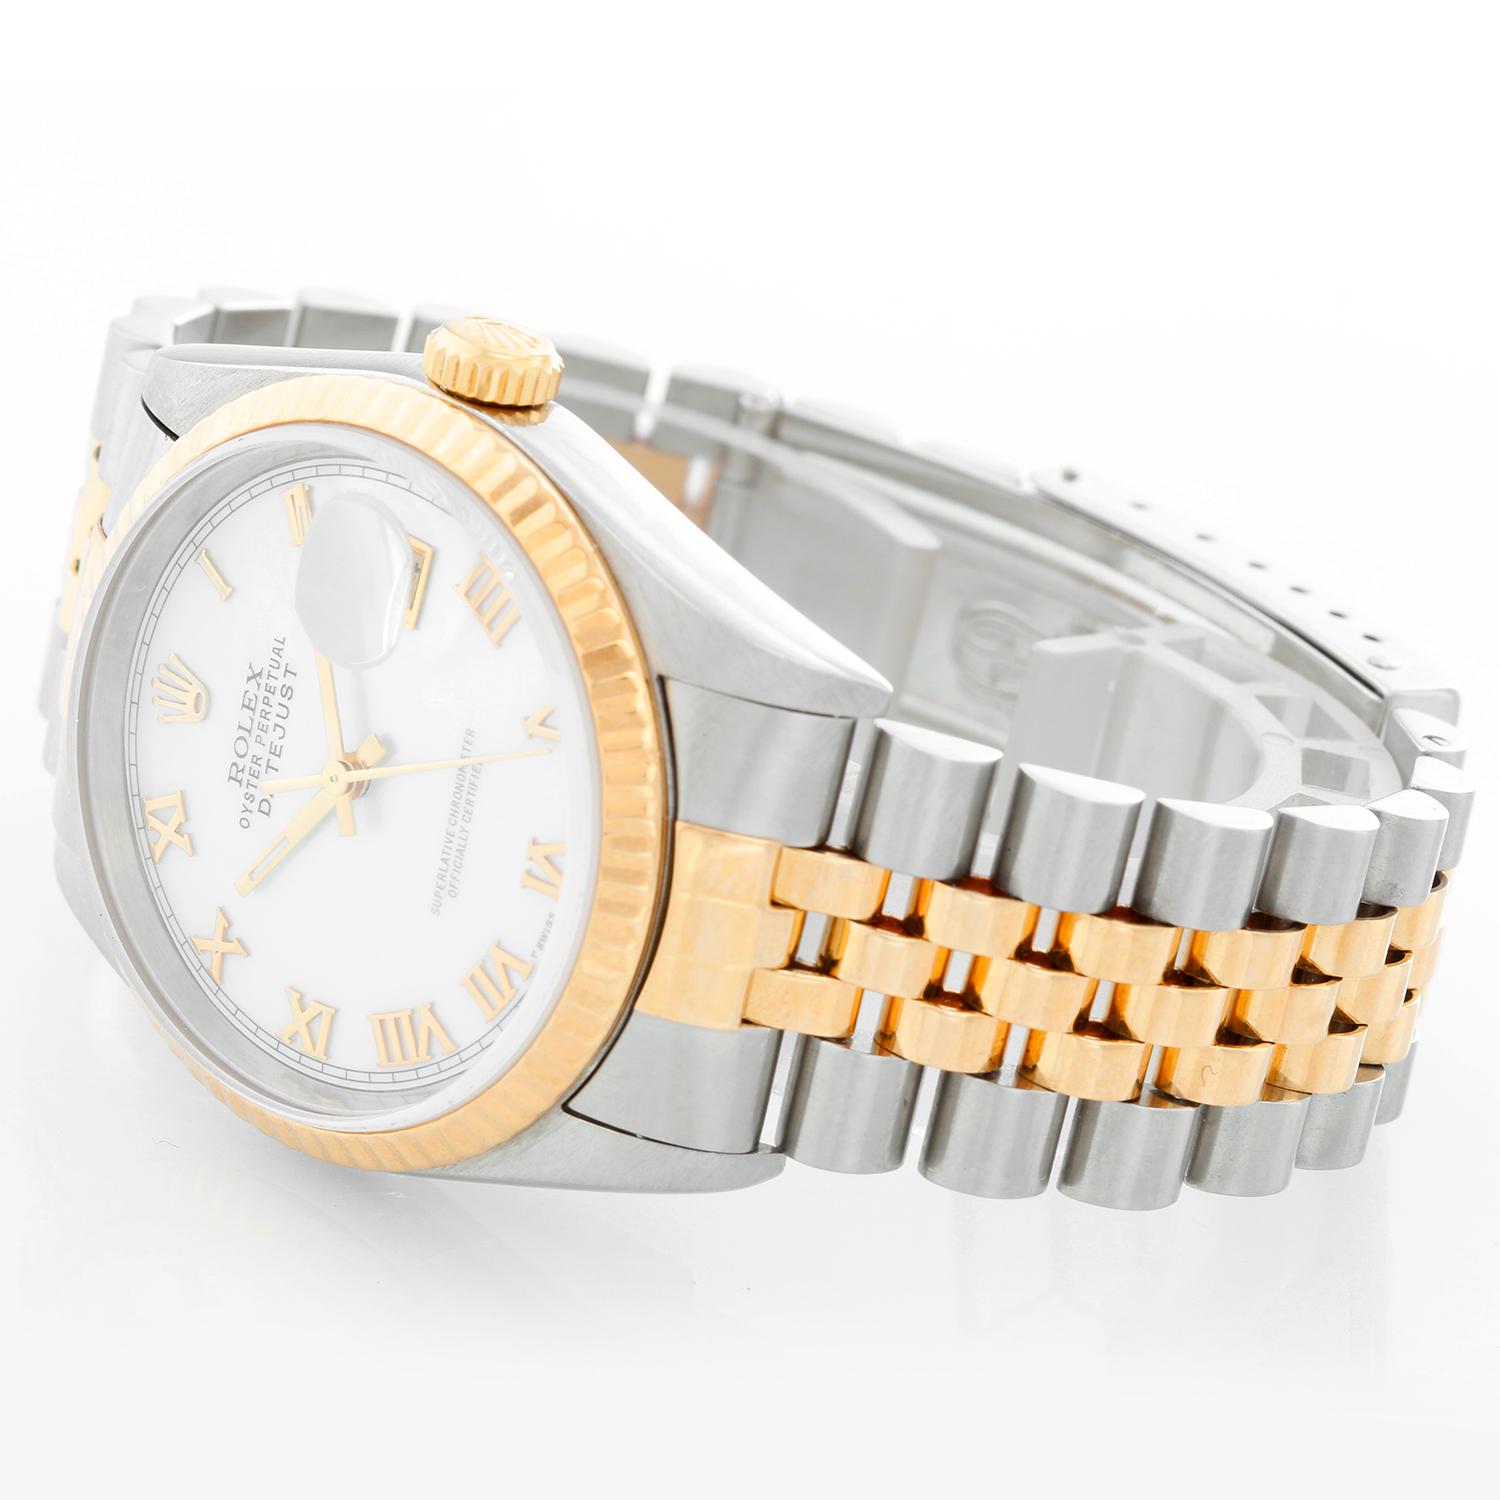 Rolex Datejust 2-Tone Men's Steel & Gold Watch 16233 - Automatic winding, Quickset, sapphire crystal. Stainless steel case with 18k yellow gold fluted bezel (36mm diameter). Custom Mother of Pearl Roman numeral dial. Stainless steel and 18k yellow